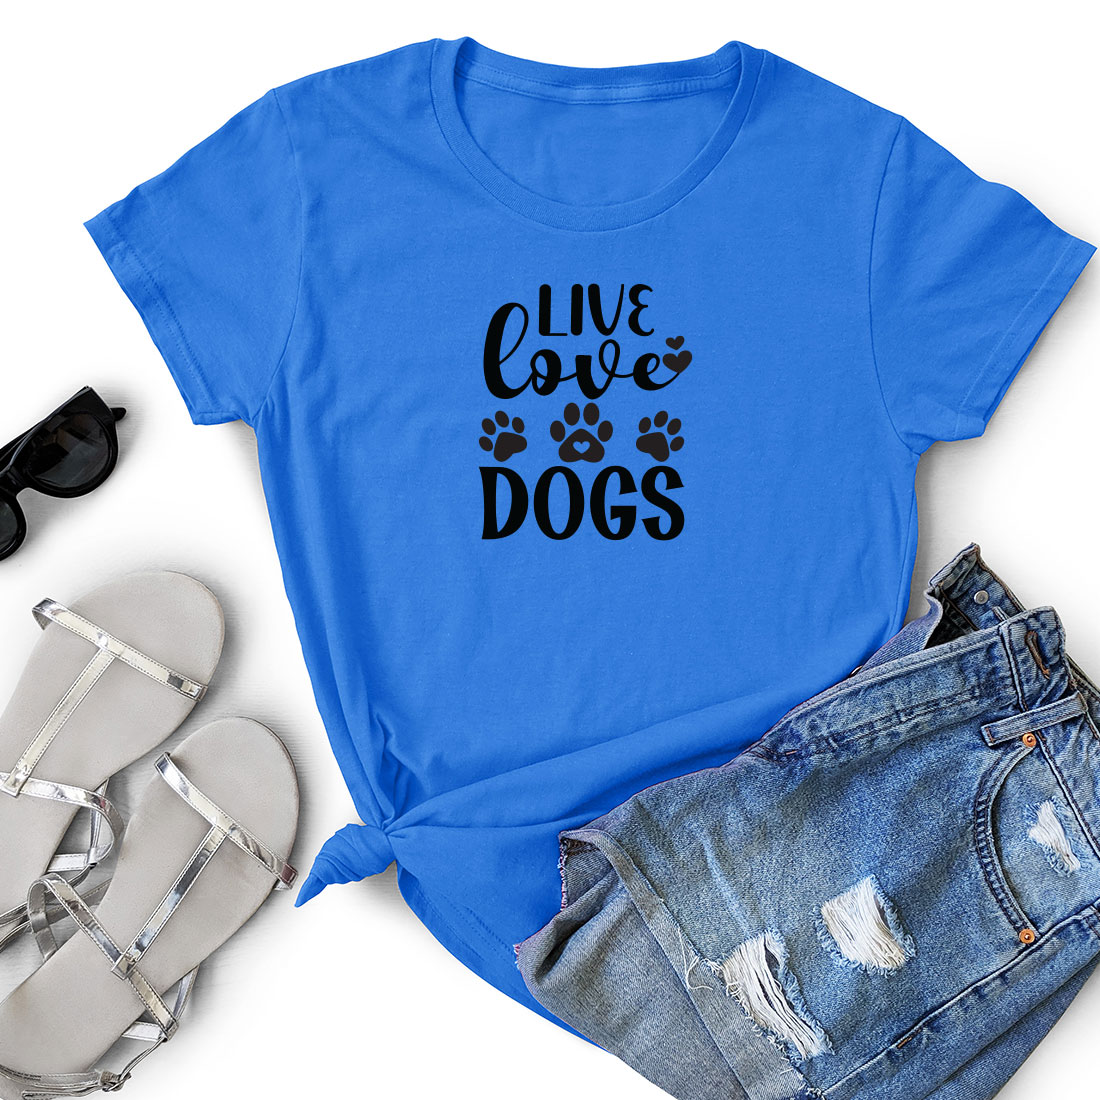 T - shirt that says live love dogs next to a pair of shorts.